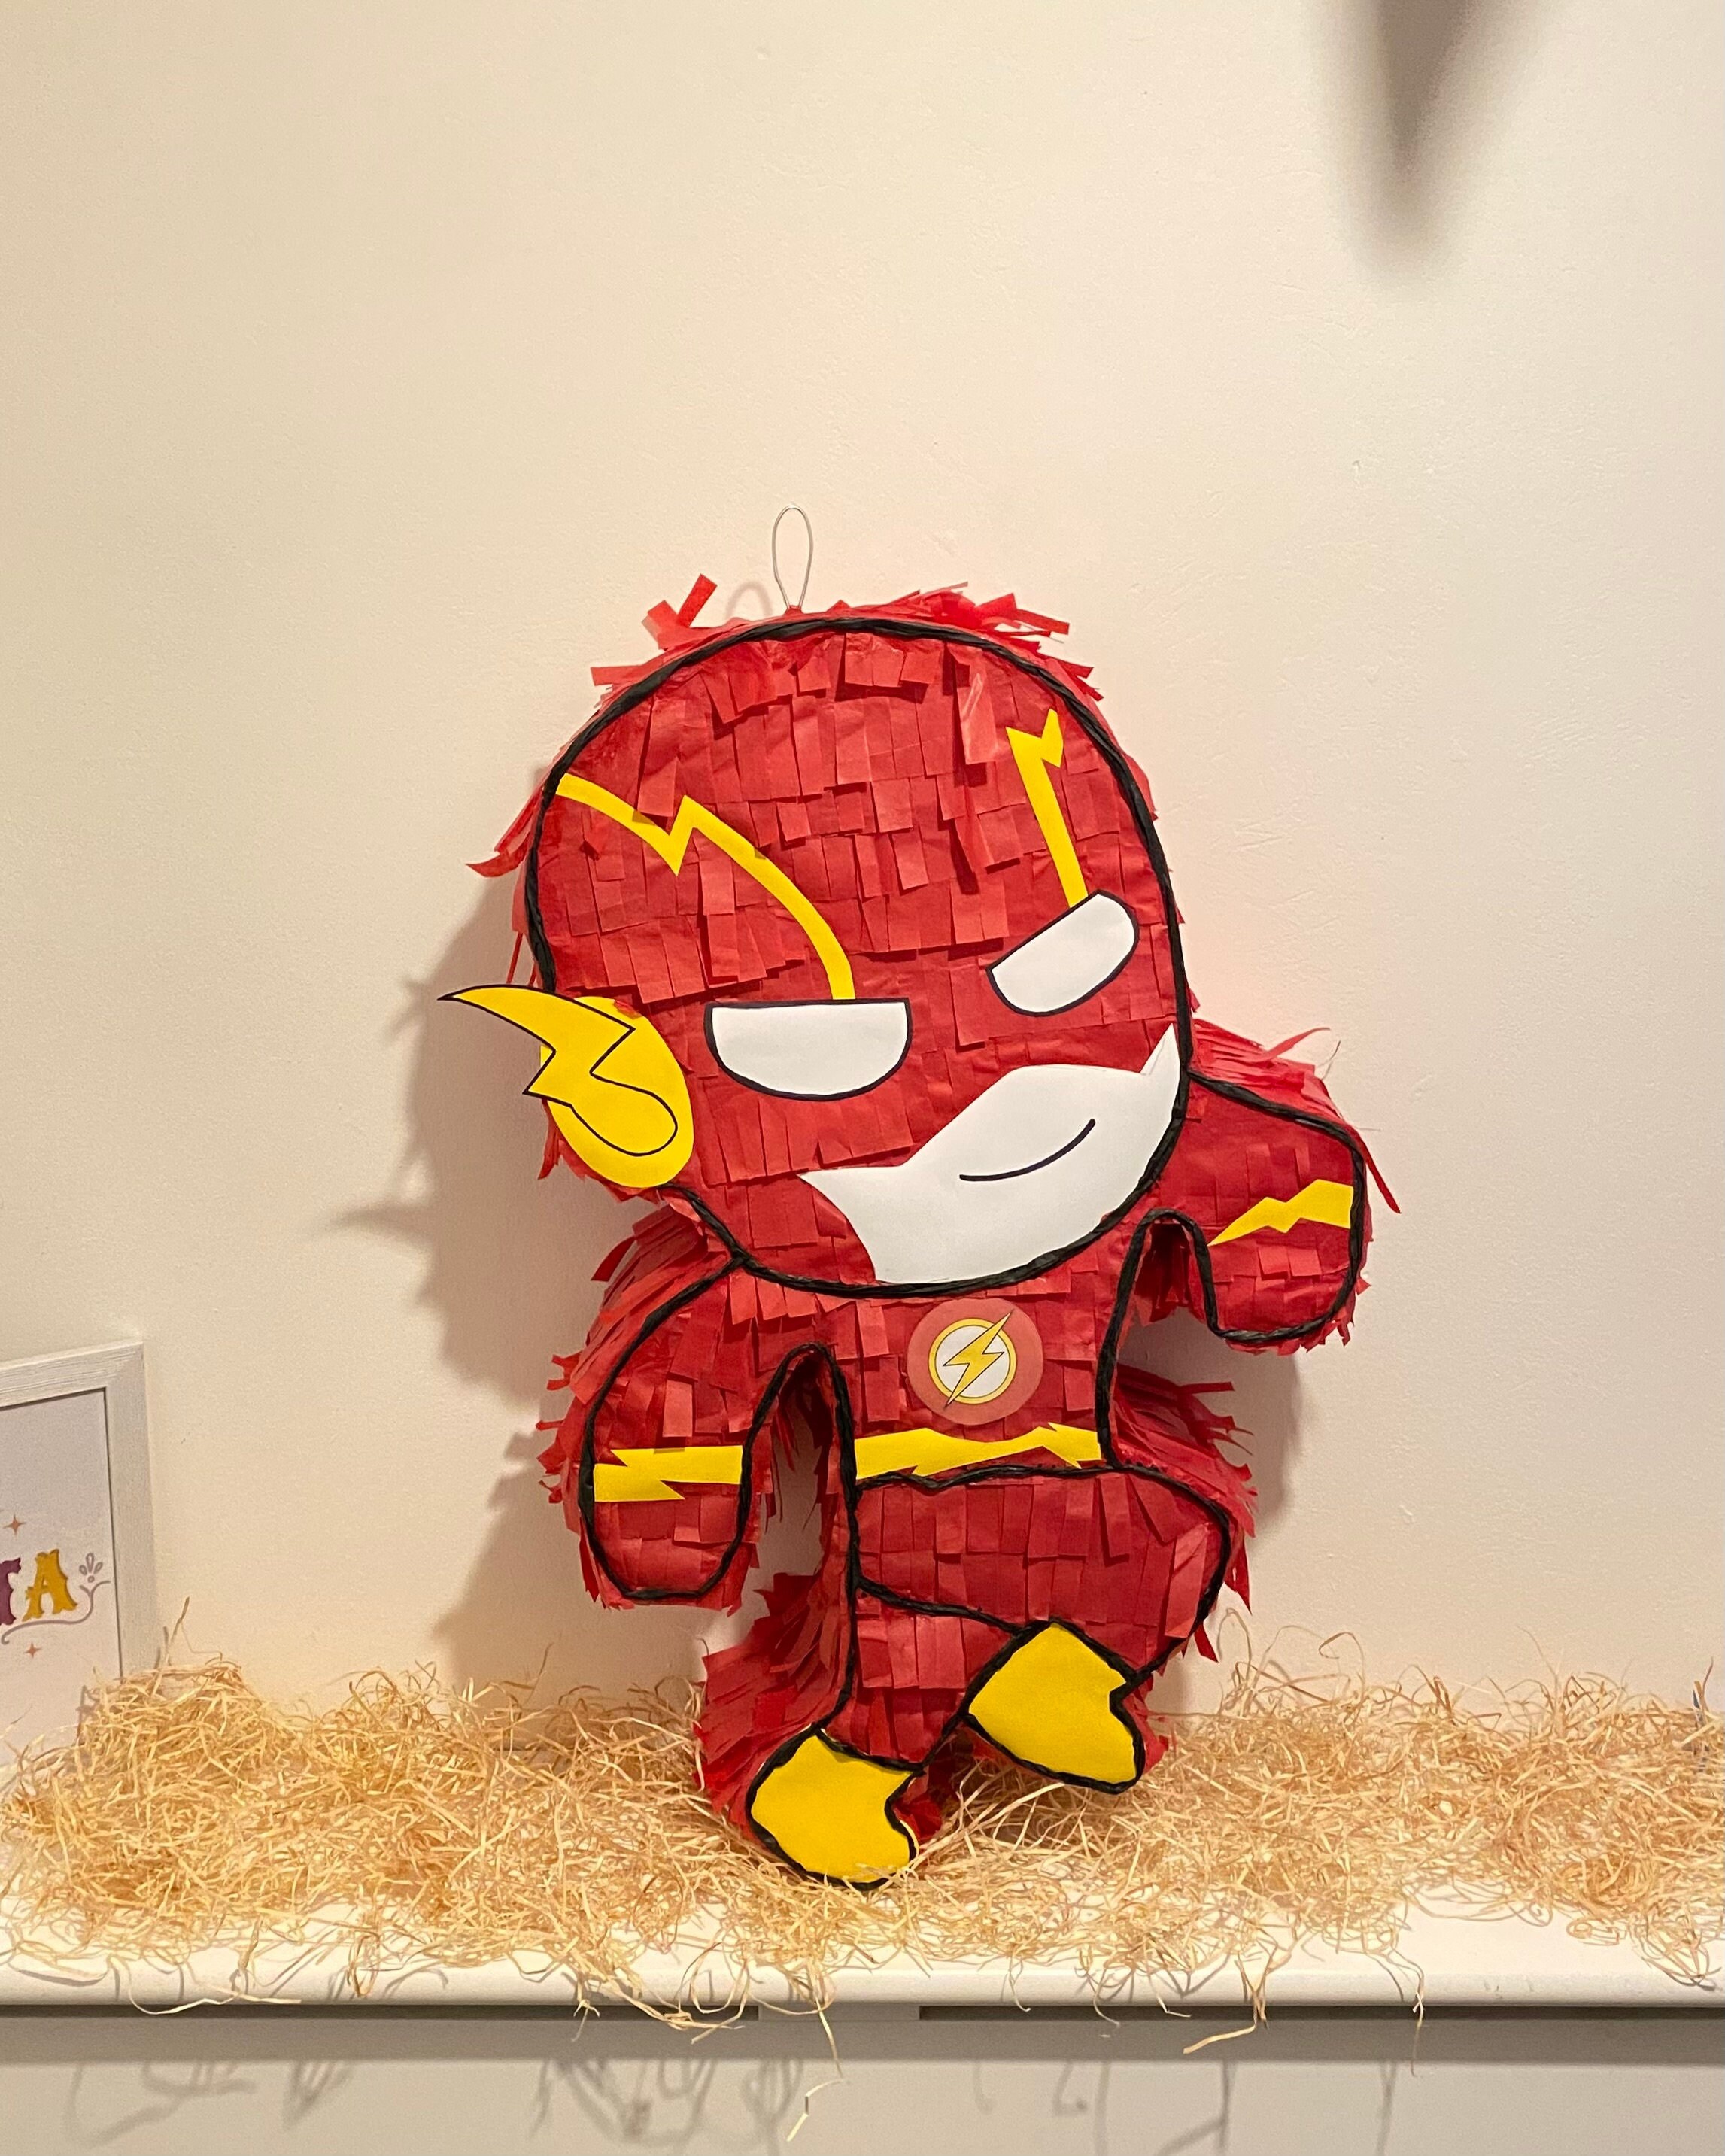 Dc and marvel super heroes number 3 pinata. number decorated Birthday Party  decoration. Superhero Pinata. Superhero birthday. justice league